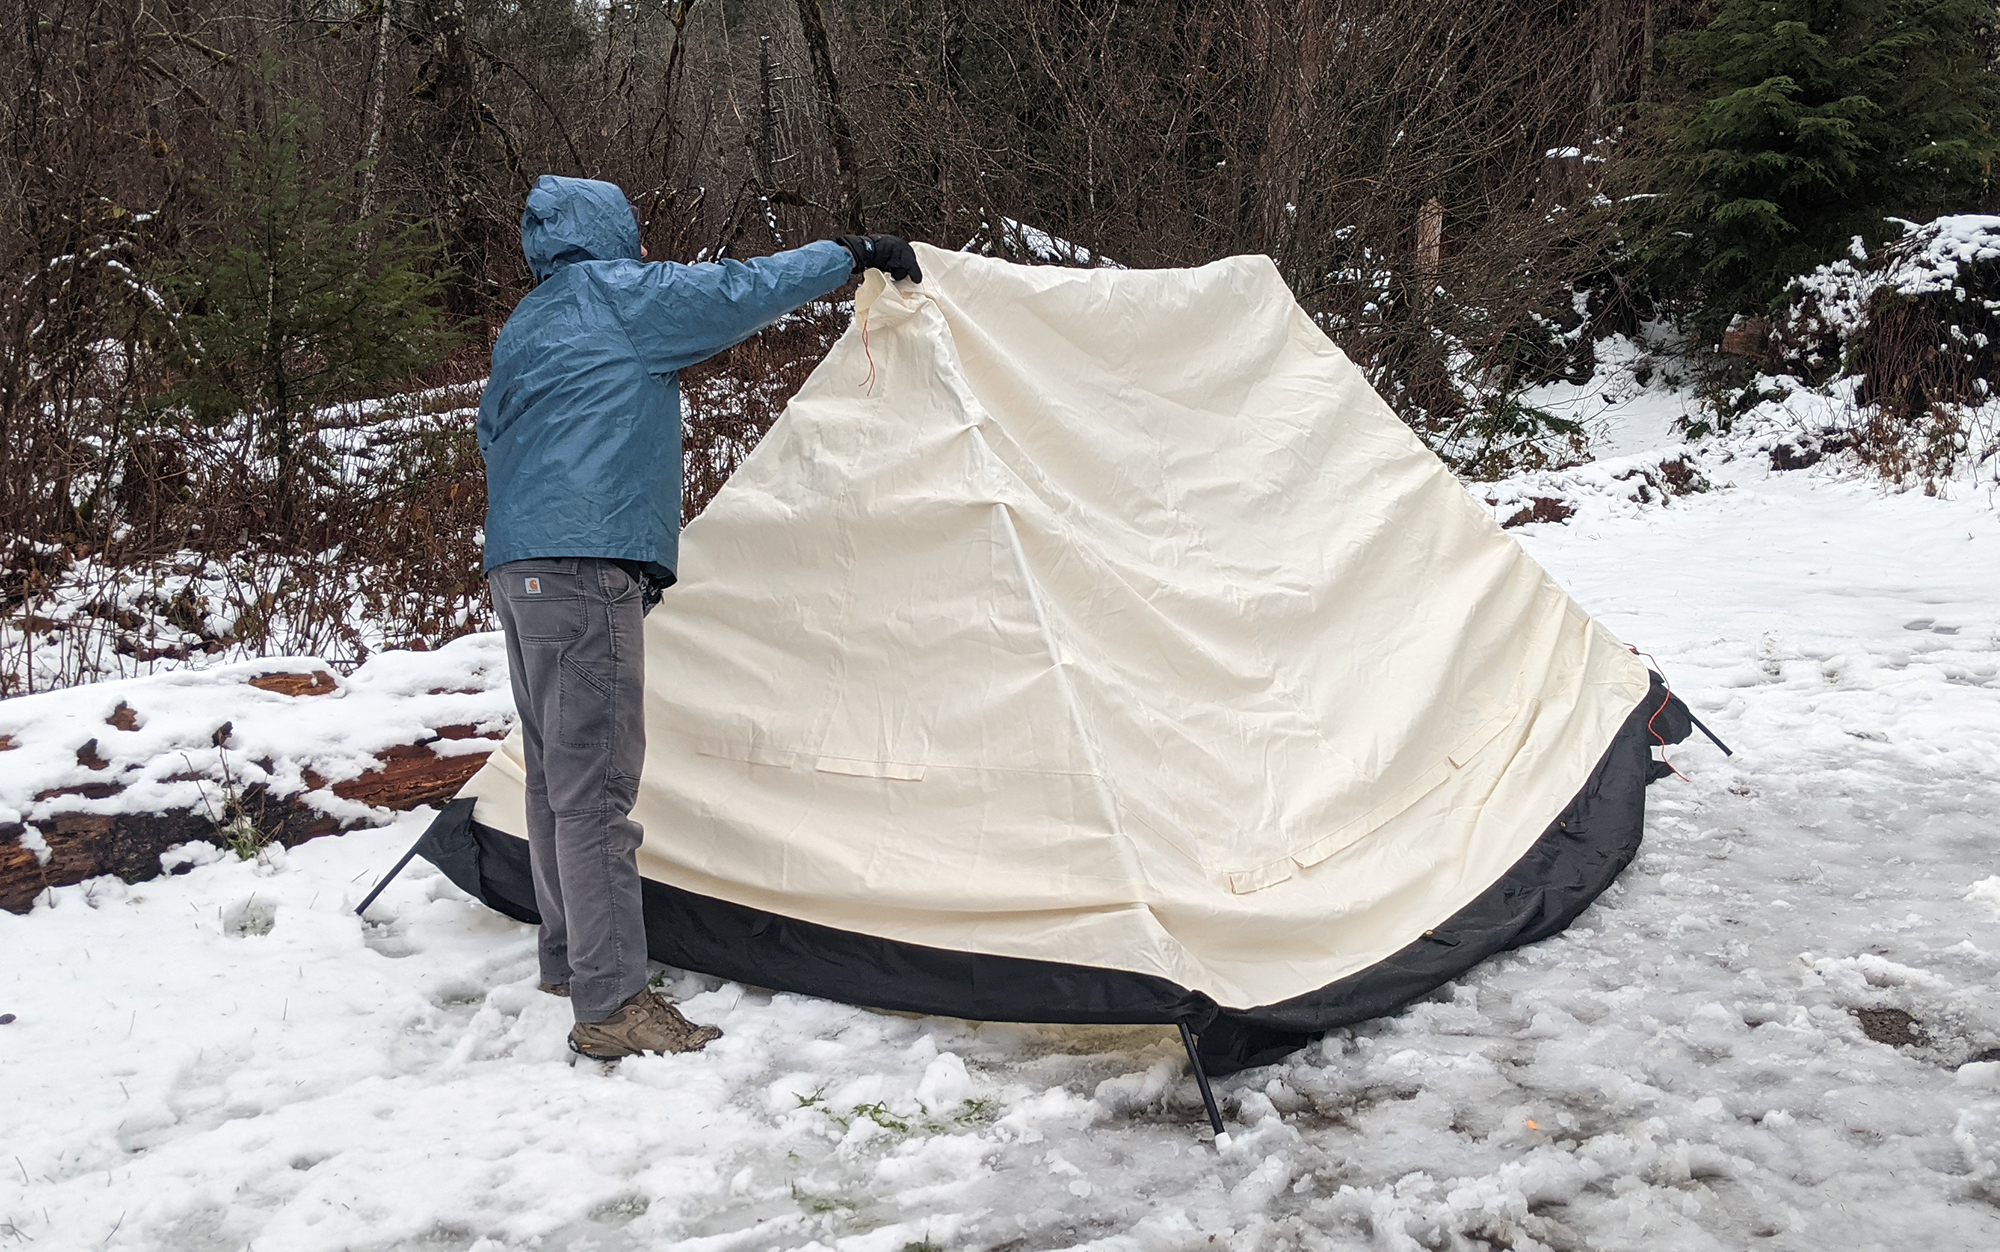 Draping the tent body over the sawhorse configuration in our slush-filled campsite. 